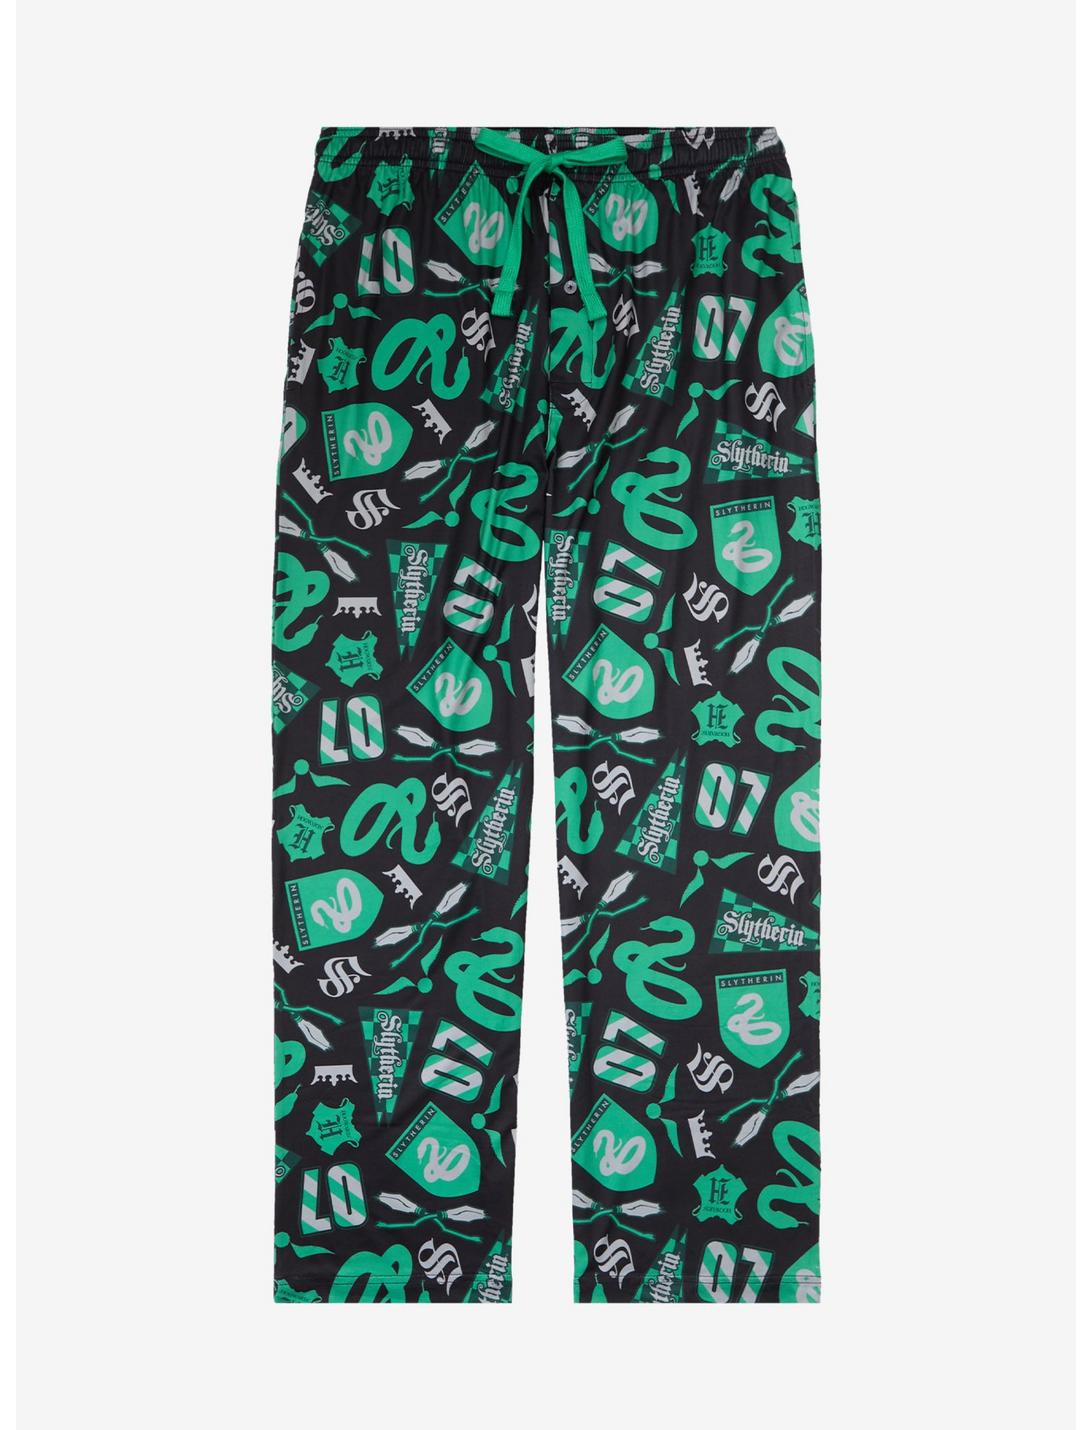 Harry Potter Slytherin Quidditch Allover Print Plus Size Sleep Pants - BoxLunch Exclusive, GREEN, hi-res